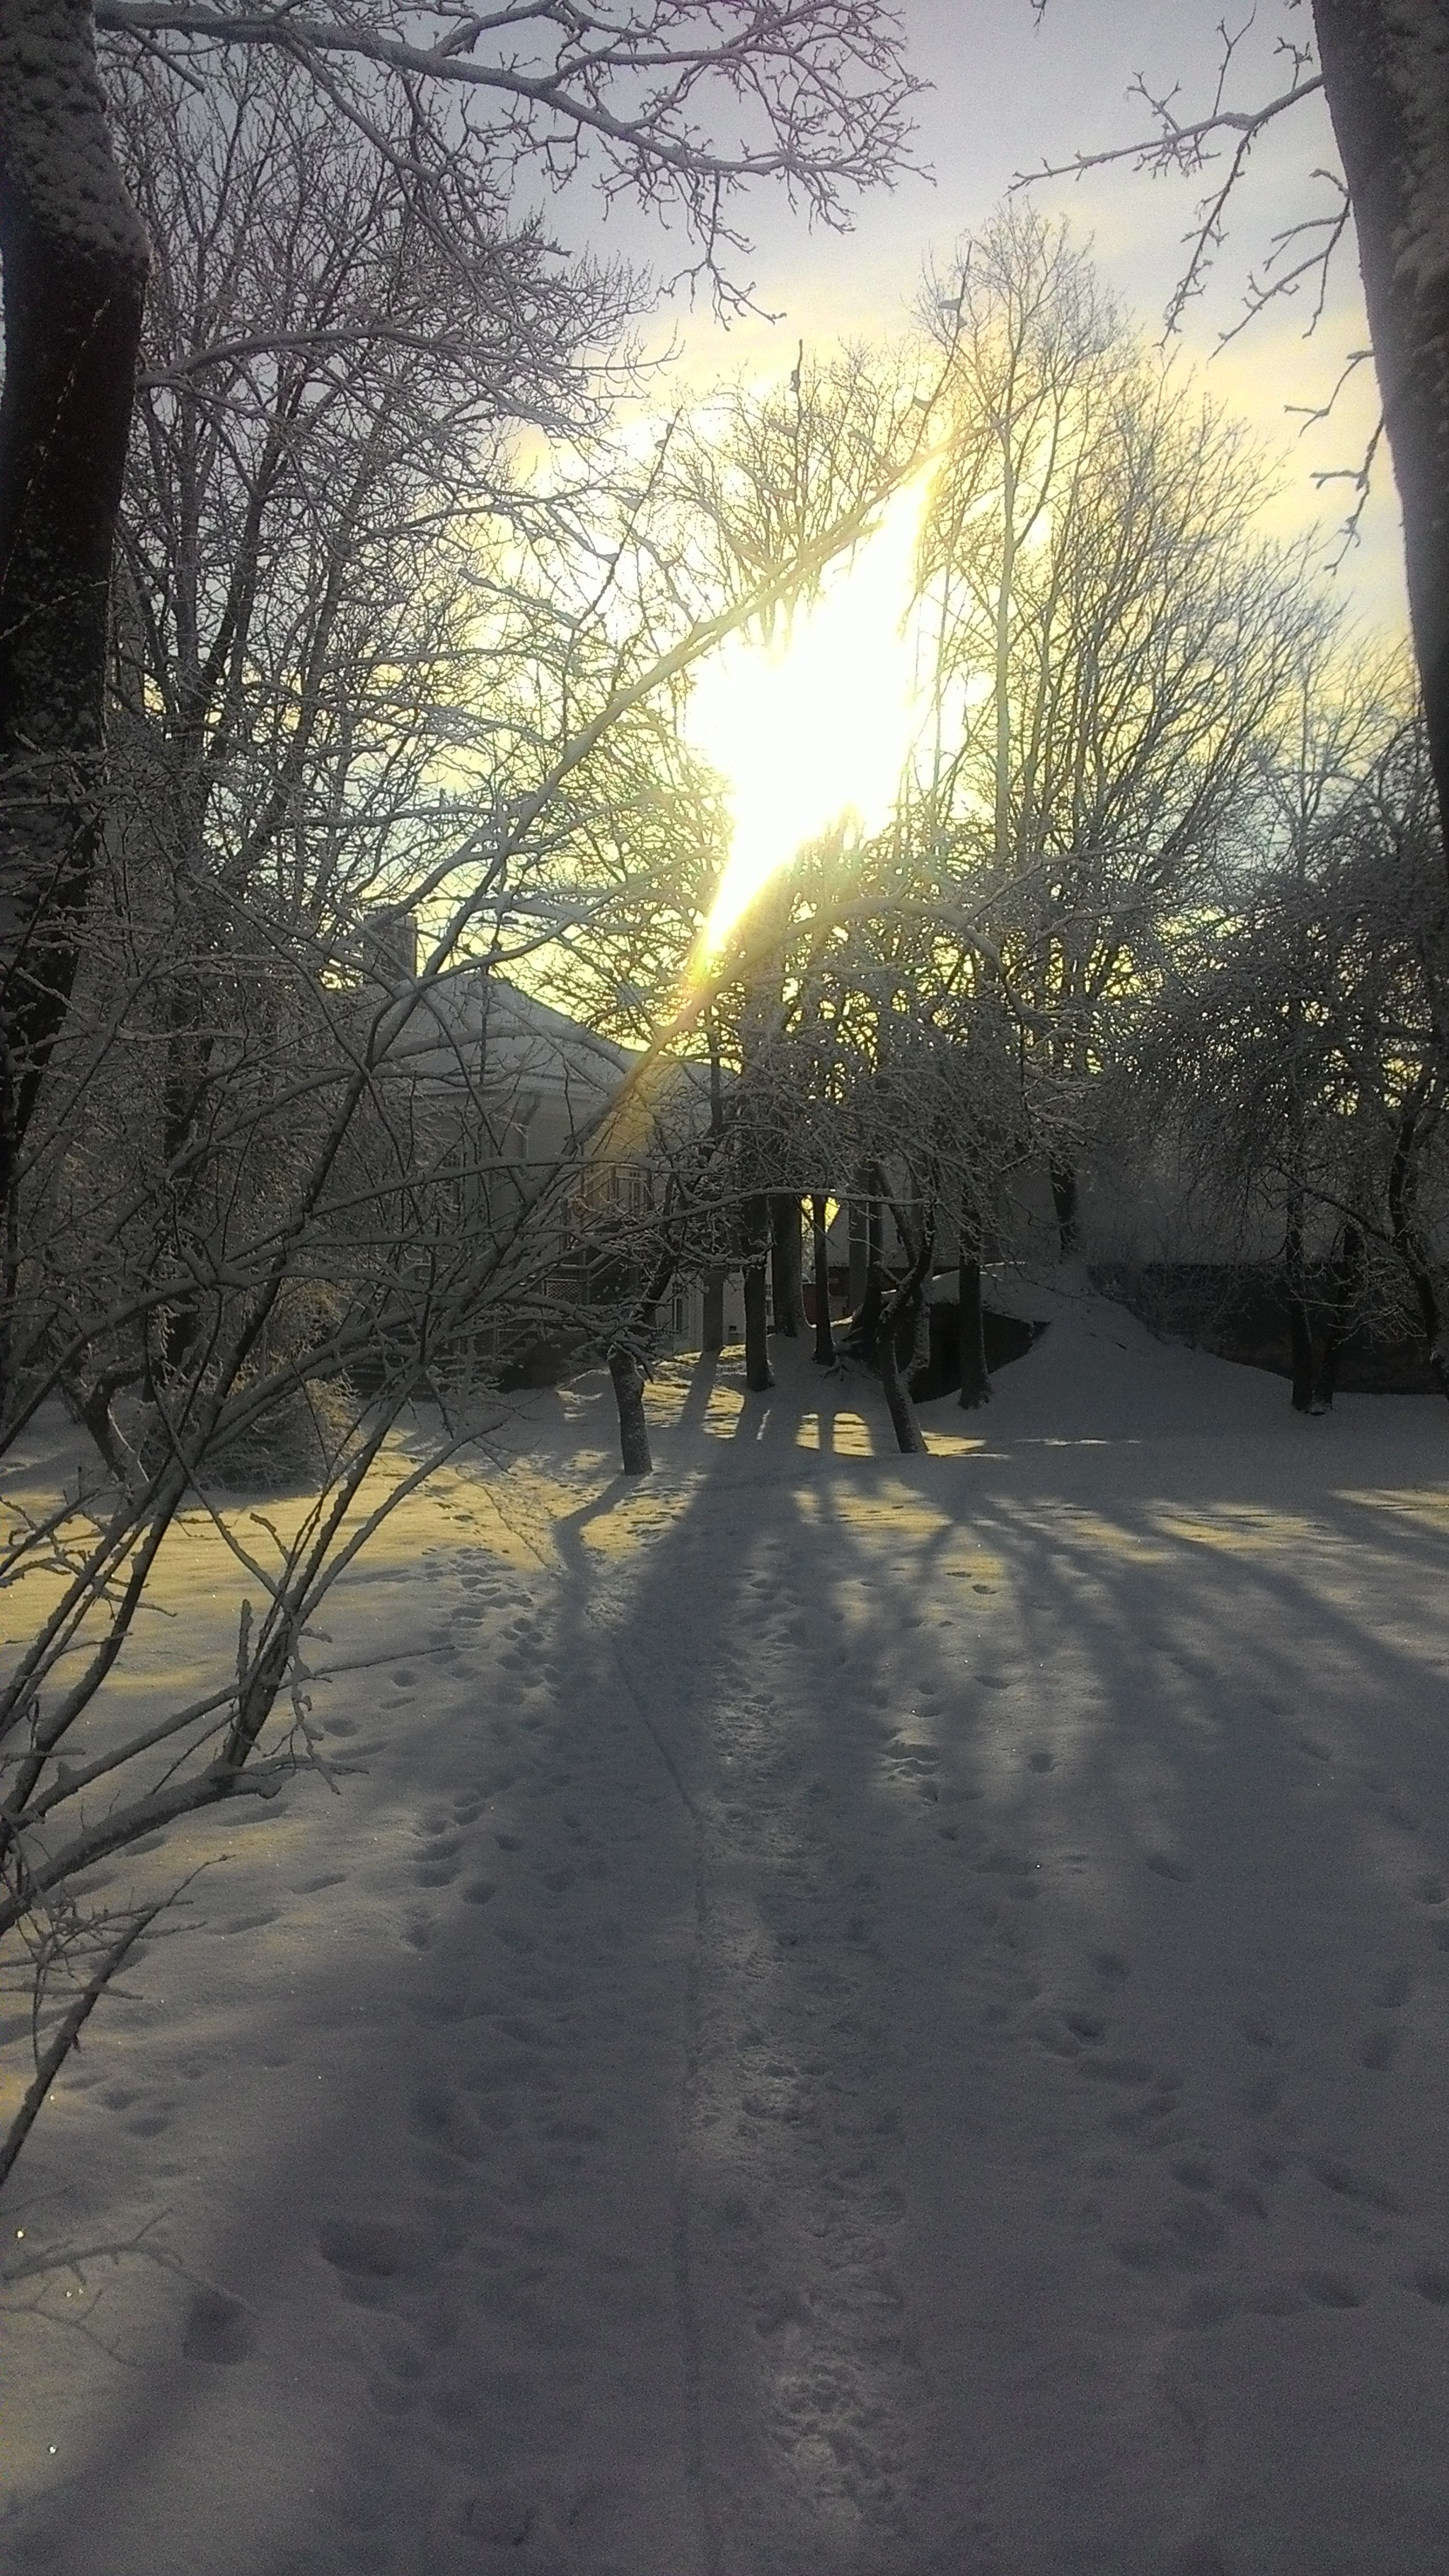 ASUS ZenFone 4 (A450CG) sample photo. Winter morning photography